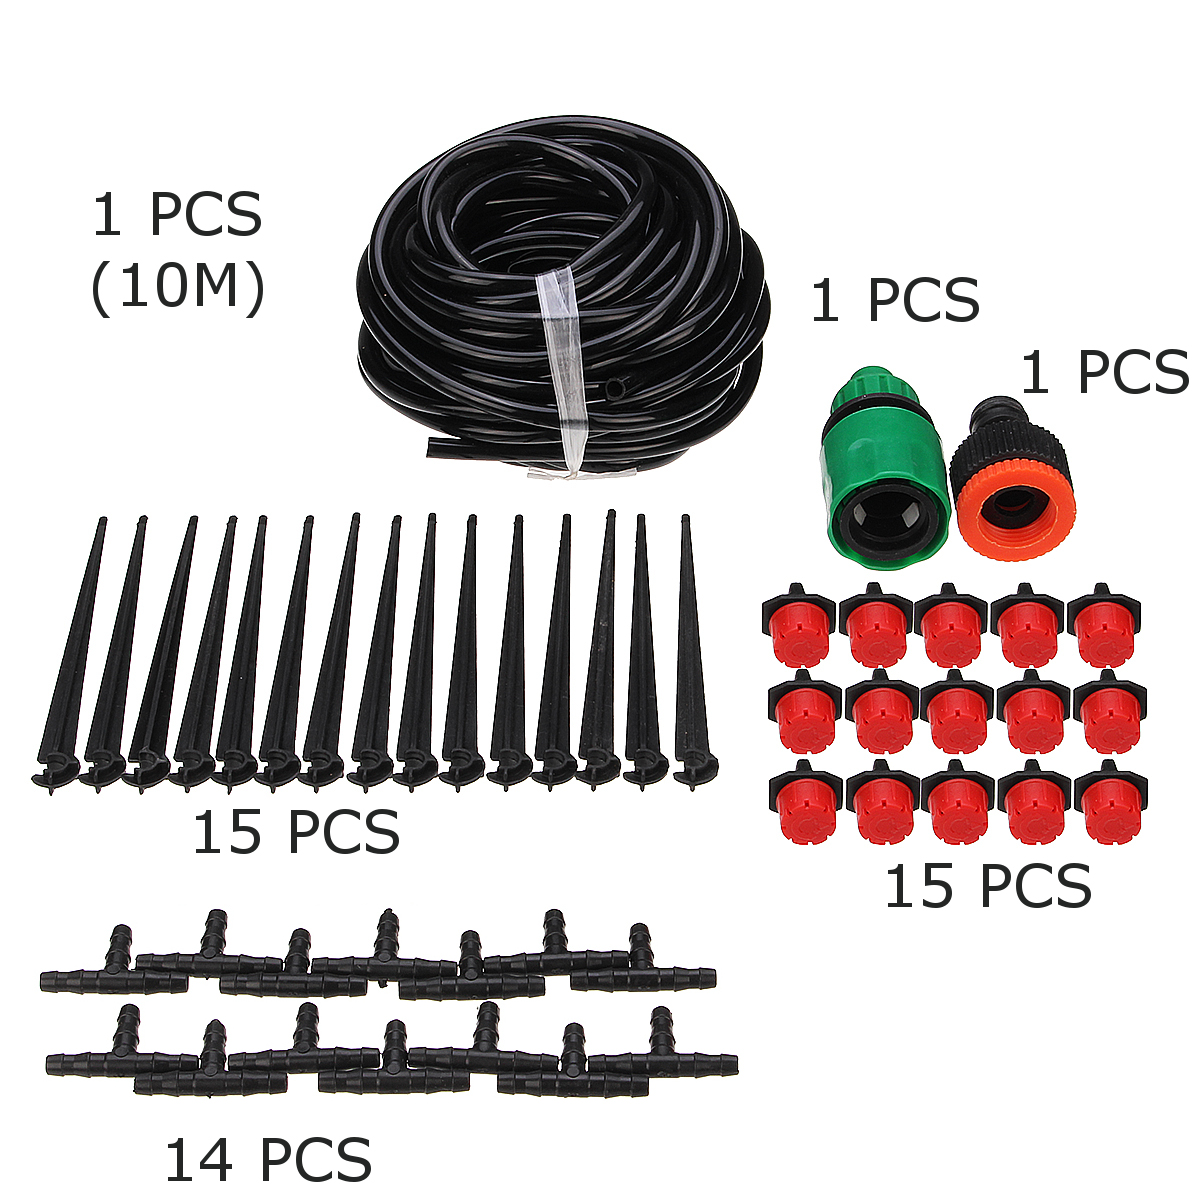 47PCS-Drip-Irrigation-Greenhouse-Garden-Plant-Watering-System-Hose-Kits-Adjusted-1518267-8